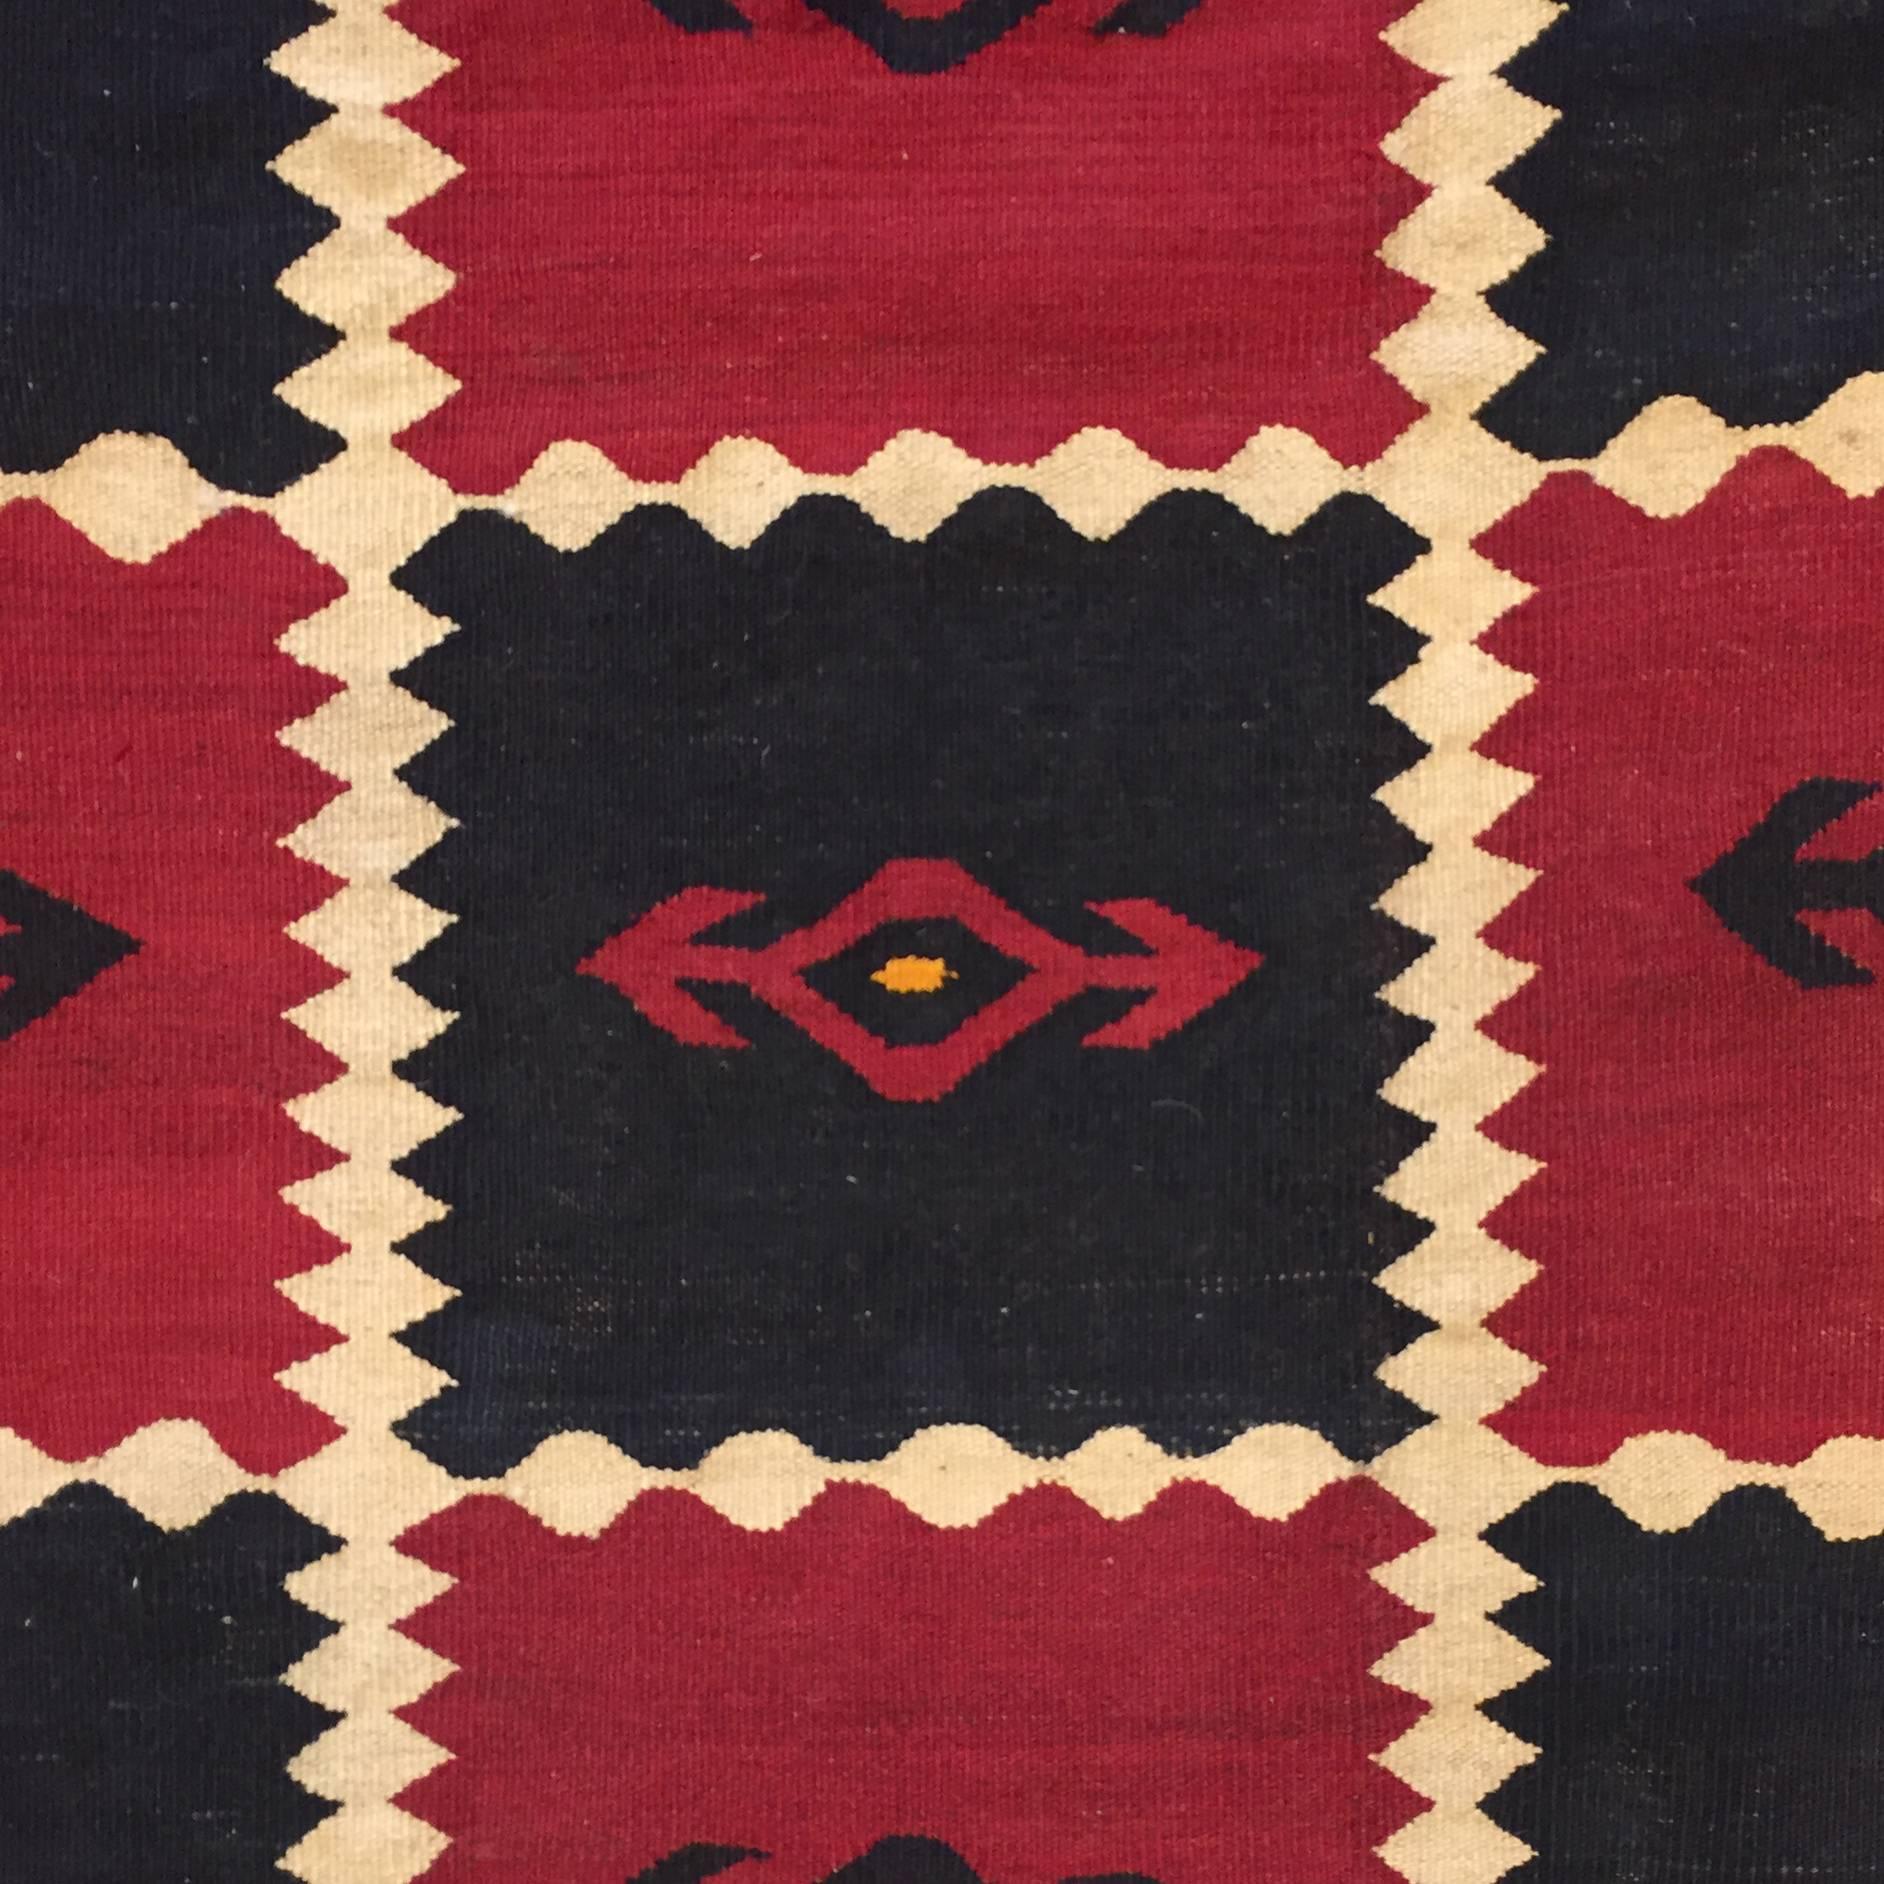 A mid-20th century Uzbek Kilim rug with a large-scale alternating crimson and black pattern, each with a double-arrowed motifs, divided with zig-zag stripes, and surrounded by a wide natural brown wool borders with matching double-arrowed motifs,